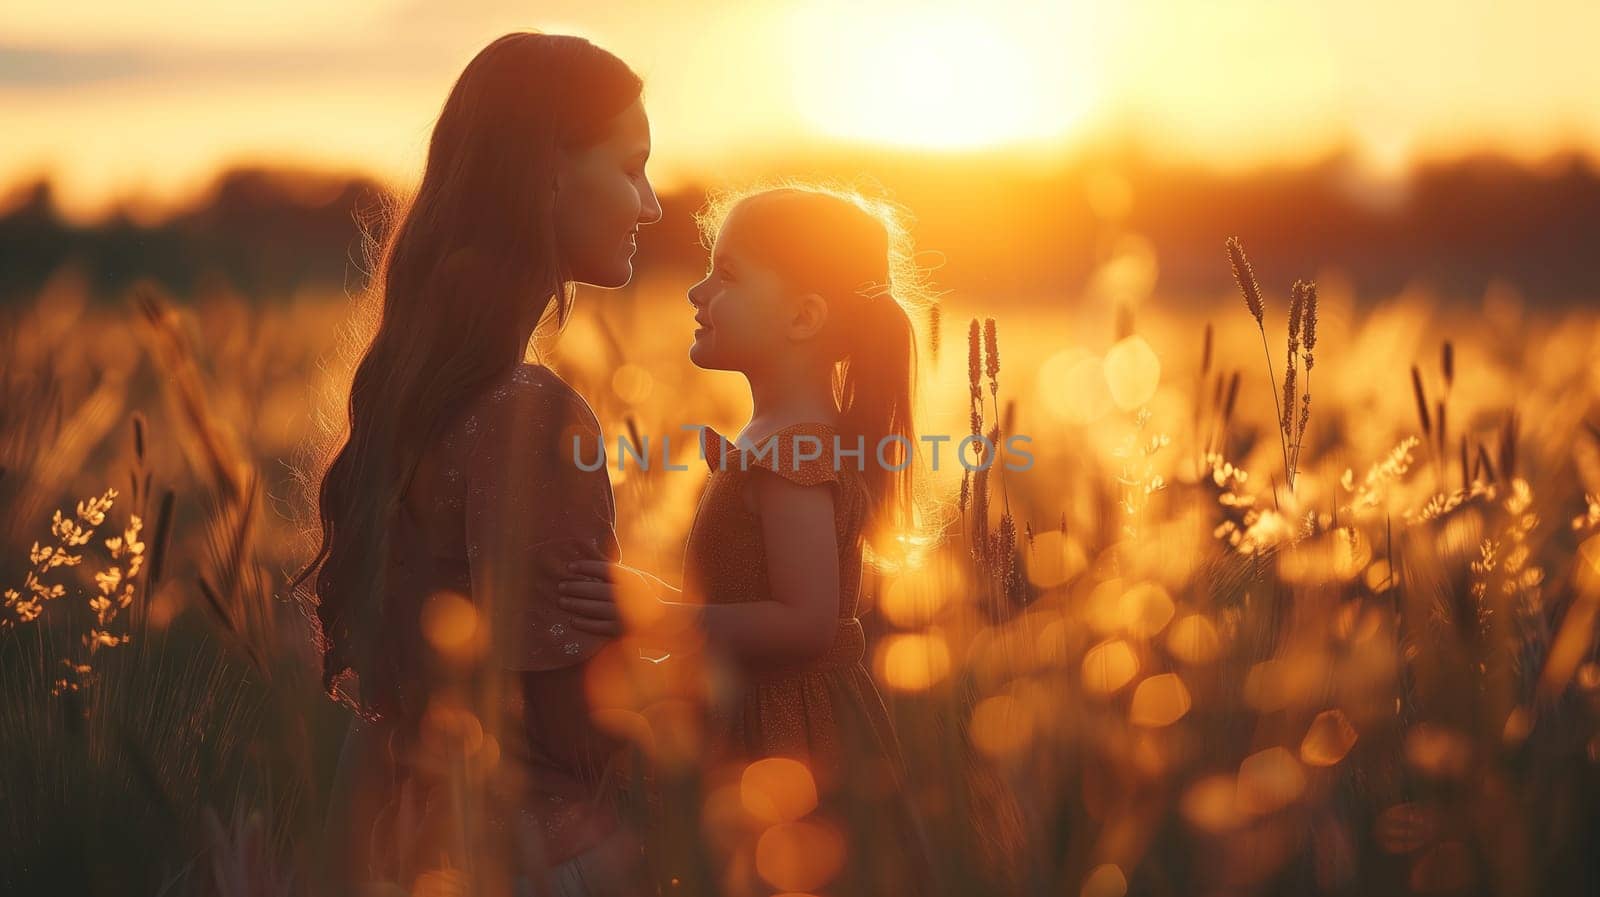 A mother and her daughter are standing together in a field, illuminated by the warm glow of the setting sun. They are looking out towards the horizon, enjoying a special moment together on International Mothers Day.